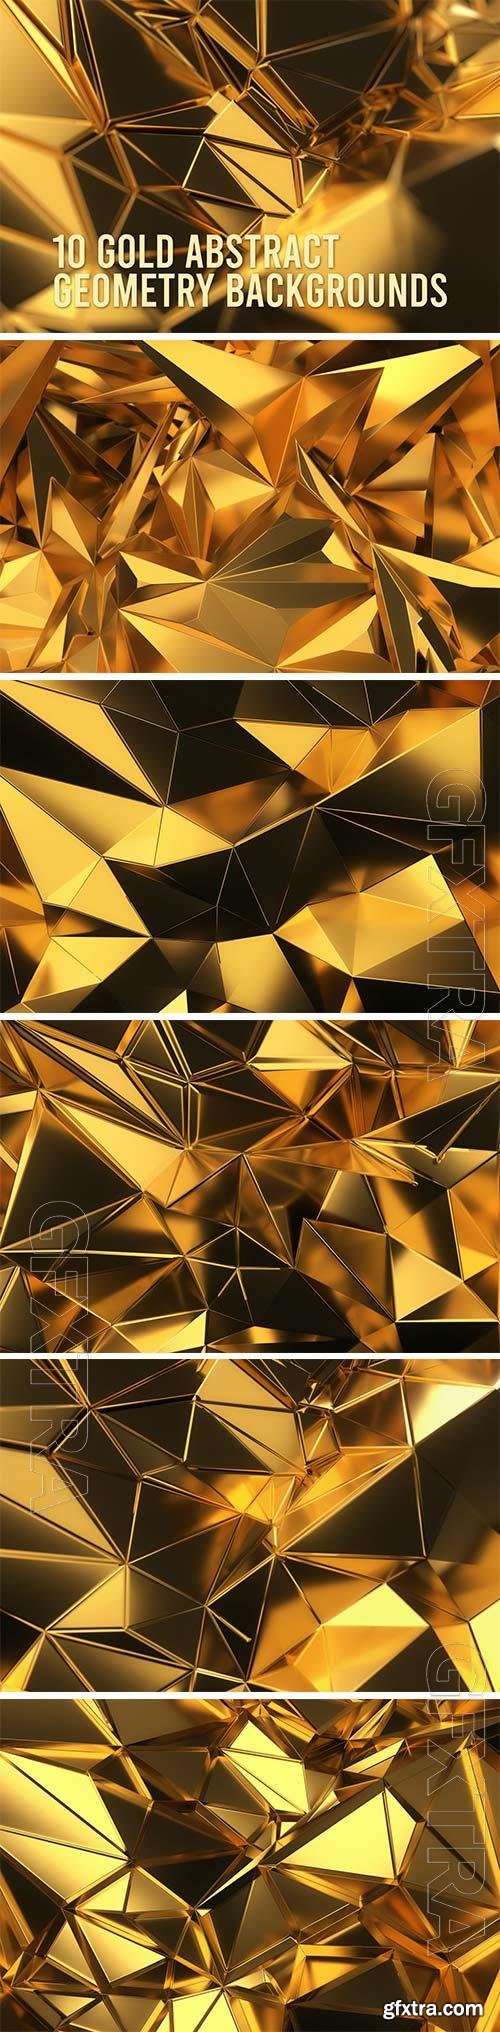 Gold Abstract Geometry Backgrounds